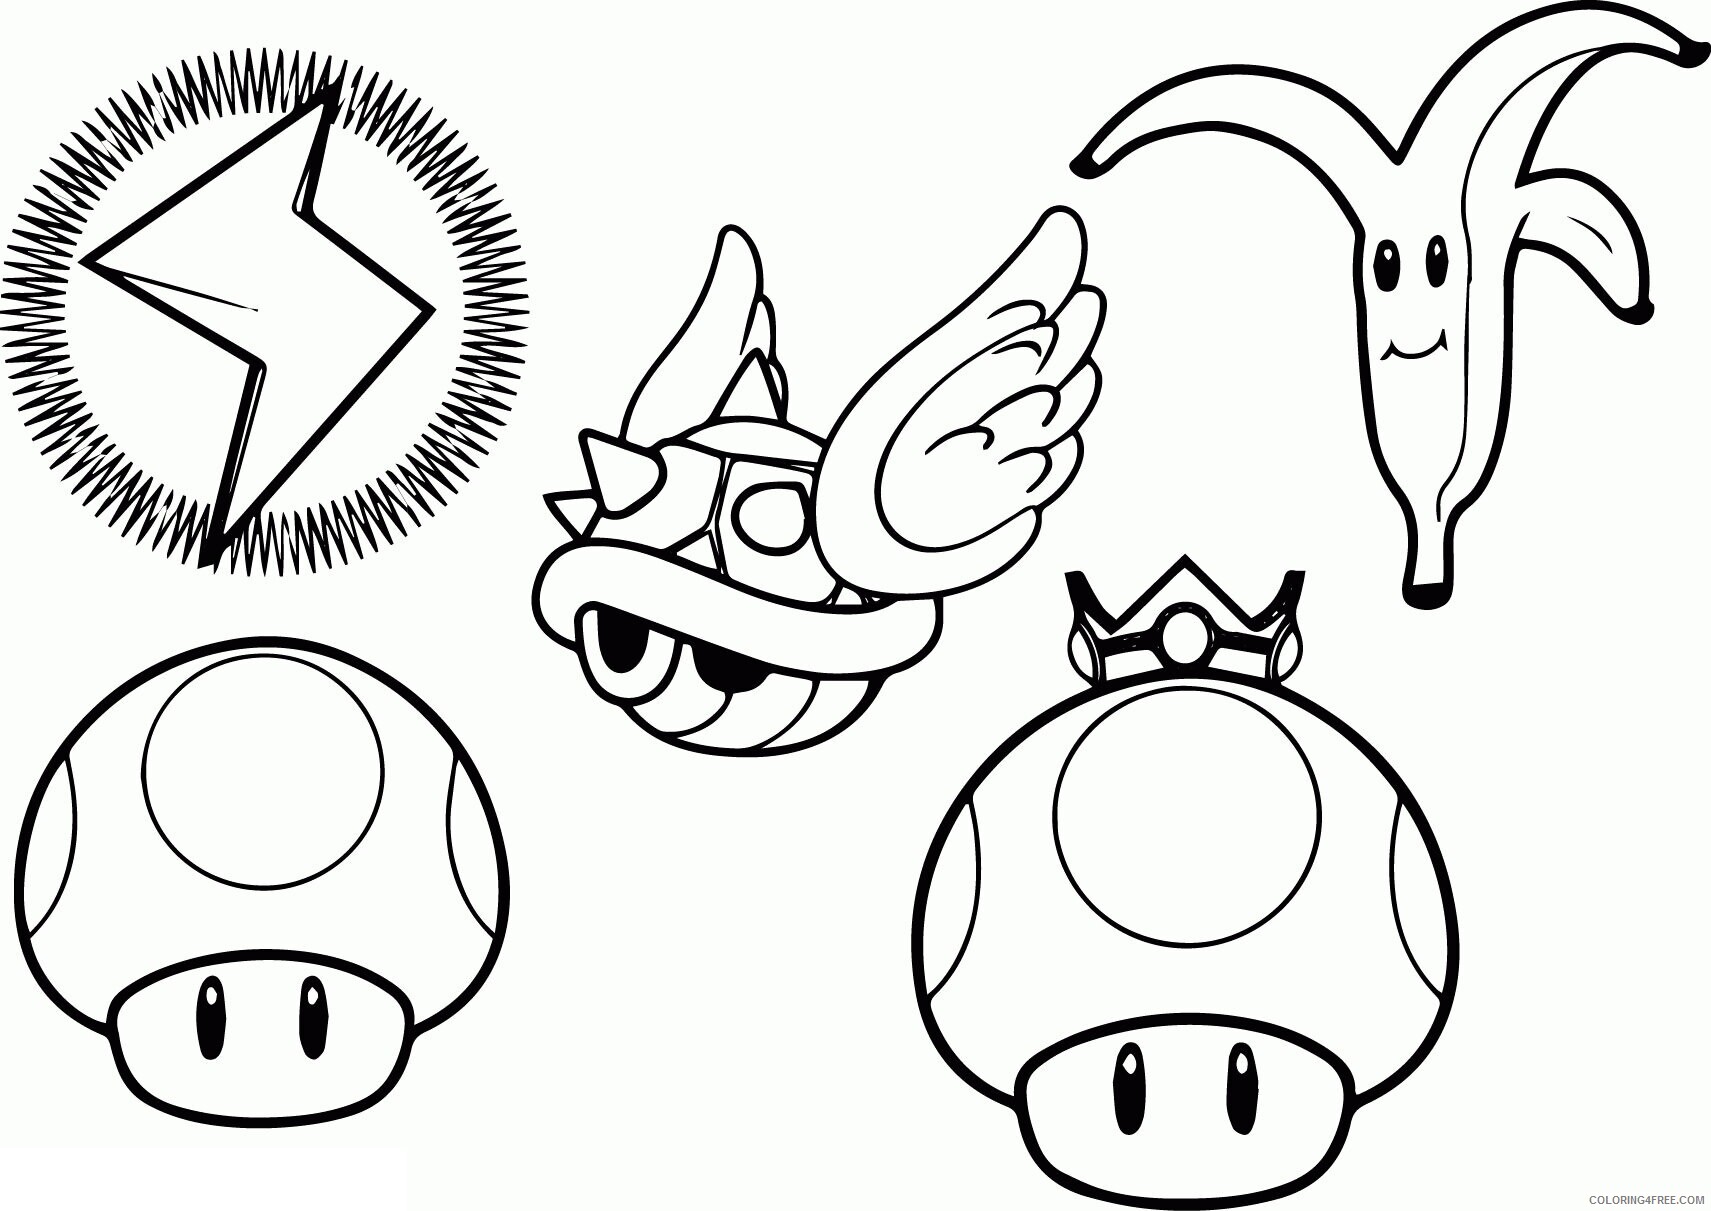 all mario character coloring pages printable sheets super characters page 2021 a 4169 coloring4free com papa coloriage gratuit